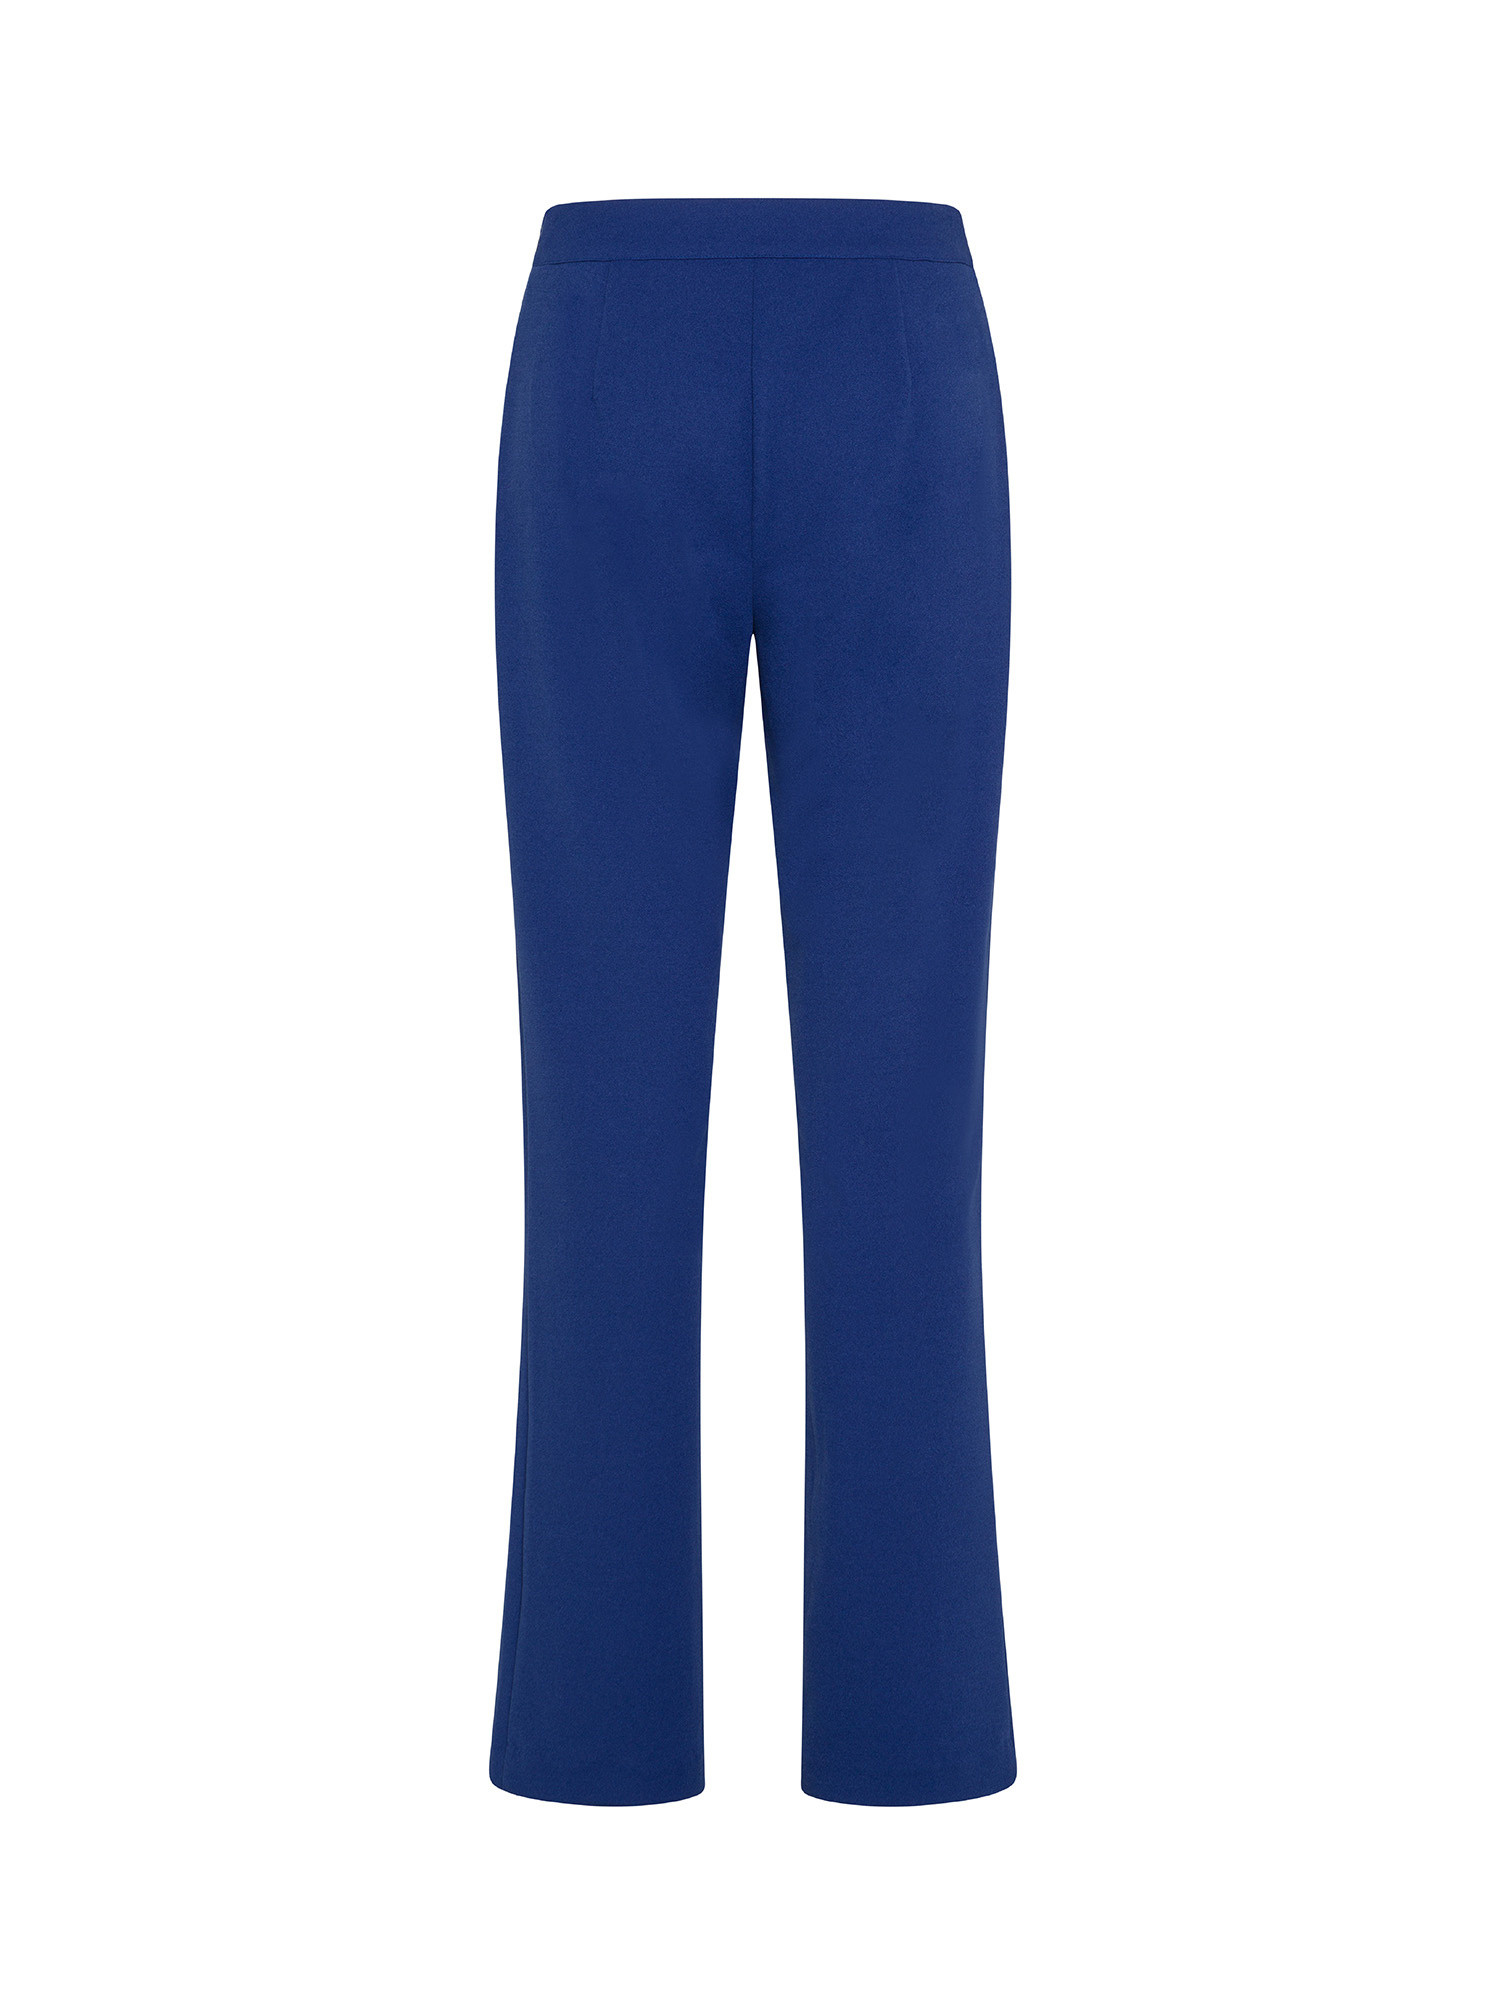 Koan - Crepe trousers with slits, Royal Blue, large image number 1